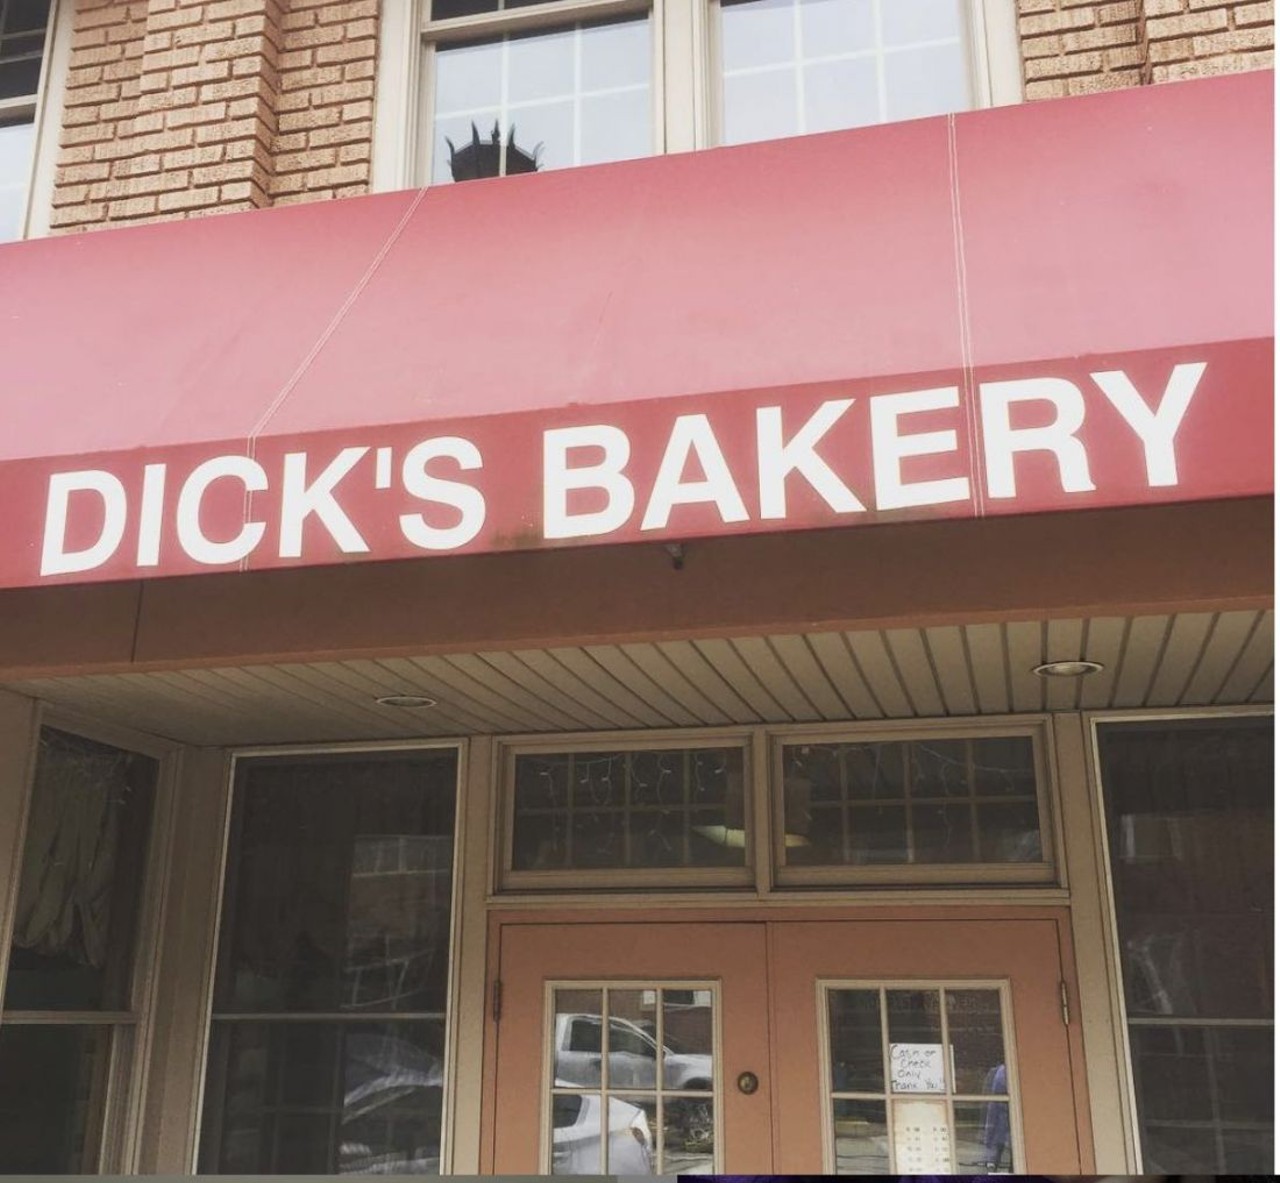  Dick&#146;s Bakery
70 Front St., Berea
Serving Berea since 1953, Dick&#146;s maintains that old-school feel that has kept it open all these years. The kuchen, the cinnamon rolls and the chocolate chip cookies are three standouts in addition to the paczki. Hours are 6 a.m to 6 p.m. Monday through Friday, 6 a.m to 5 p.m Saturday and closed on Sunday.
Photo via @Cle_Ave/Instagram